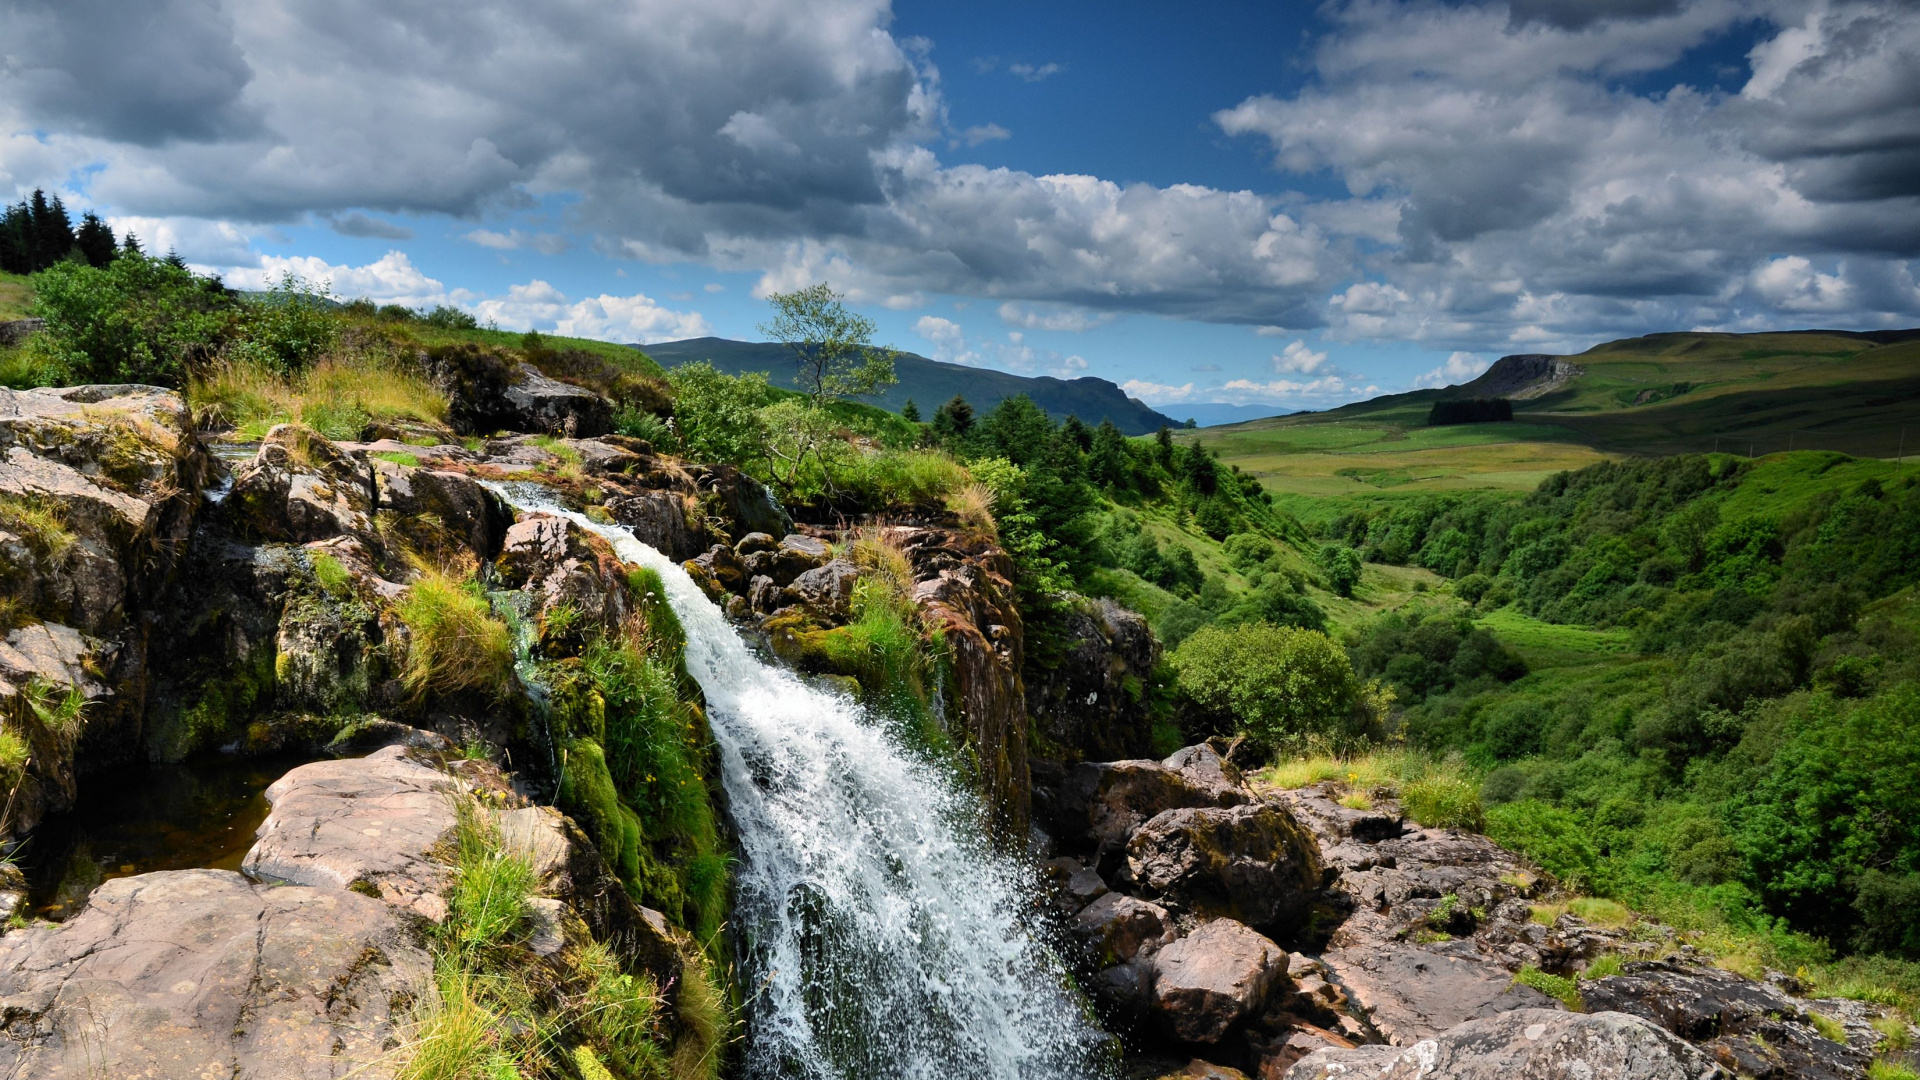 Water Falls on Green Grass Field Under White Clouds and Blue Sky During Daytime. Wallpaper in 1920x1080 Resolution